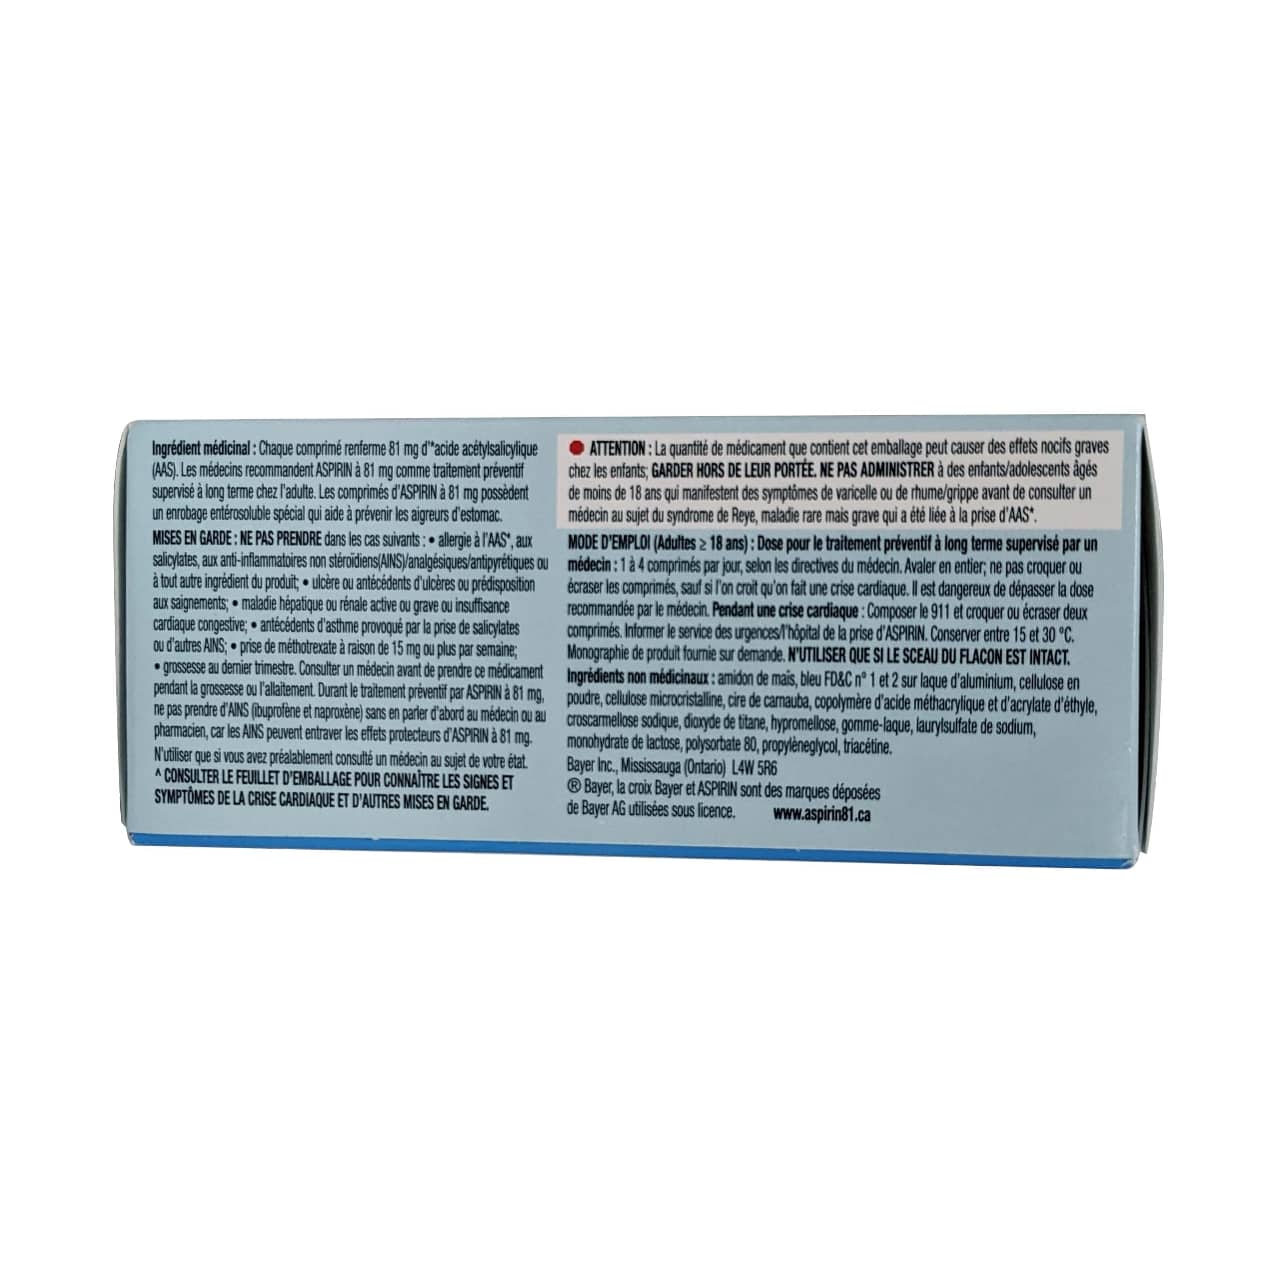 Product details, directions, ingredients, and warnings for Aspirin Acetylsalicylic Acid 81mg Low Dose Delayed Release Tablets in French